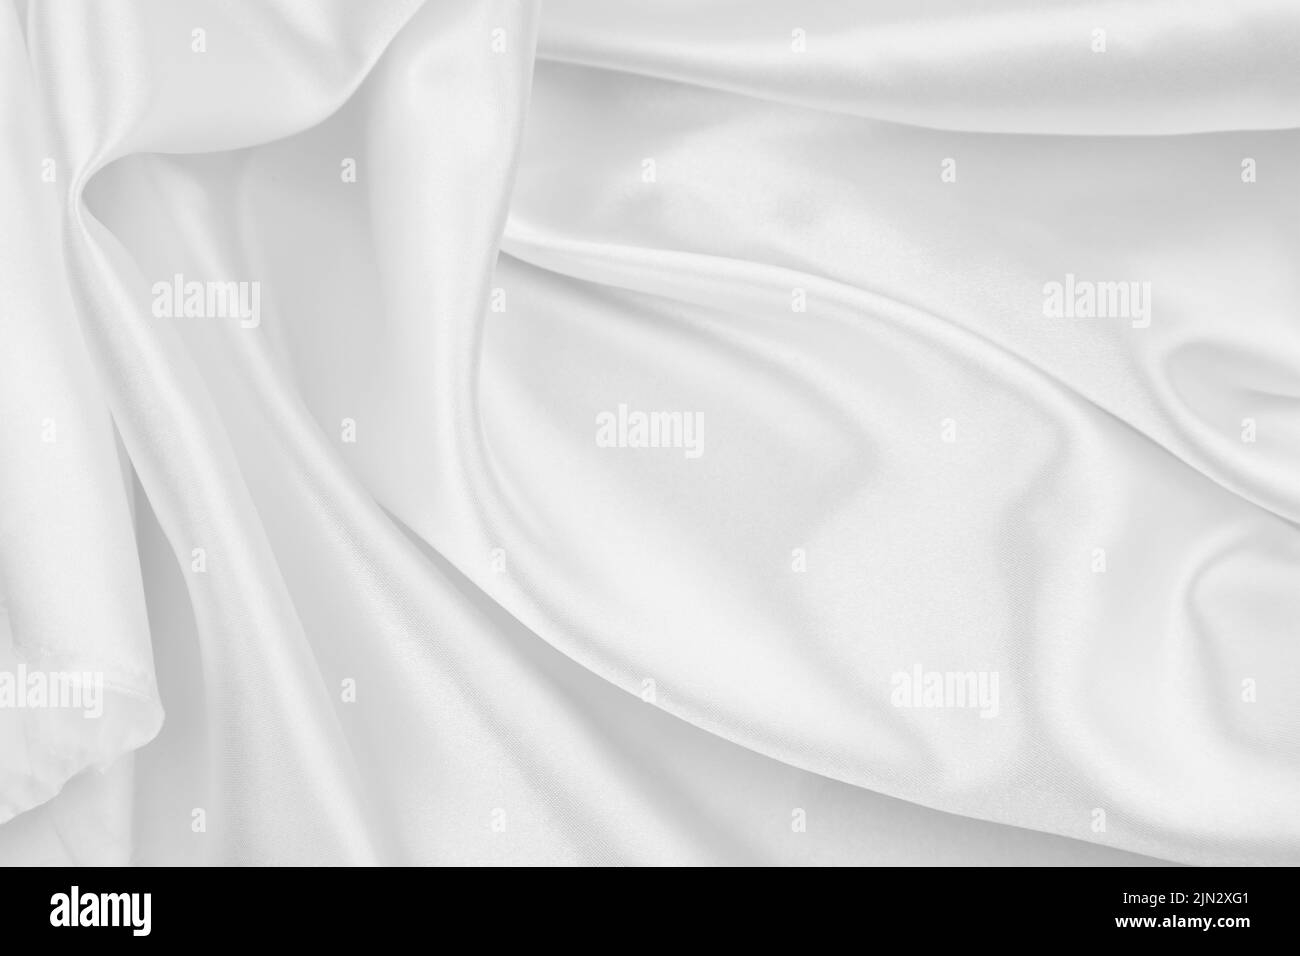 Close-up of rippled white silk fabric texture background Stock Photo